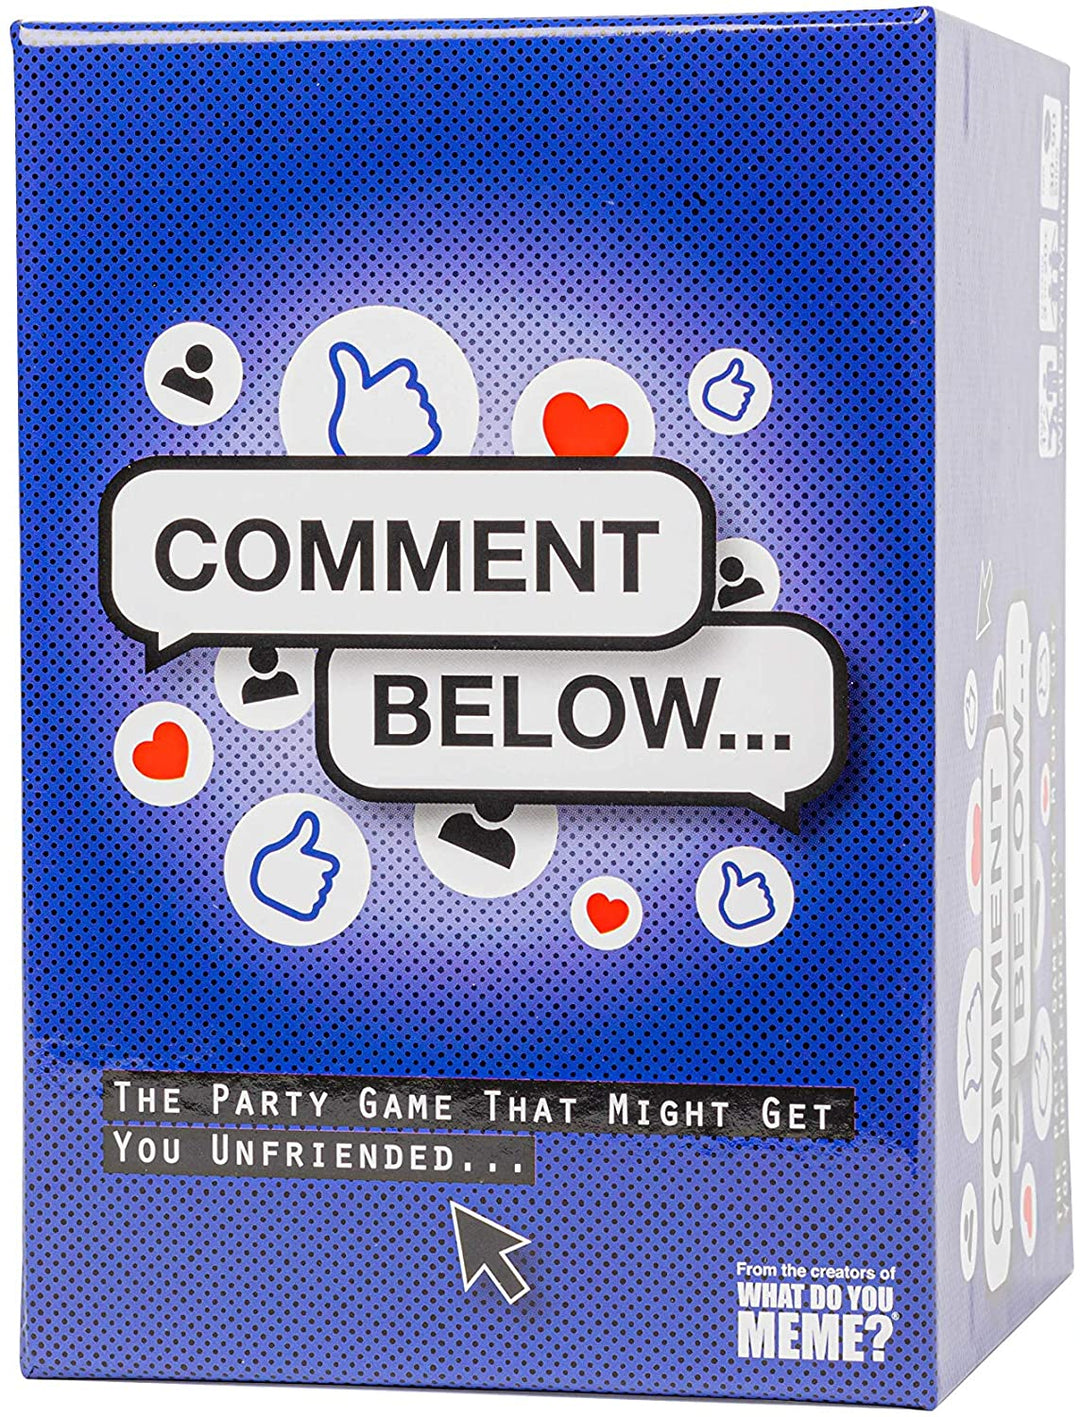 WHAT DO YOU MEME? Comment Below - The Party Game That Might Get You Unfriended